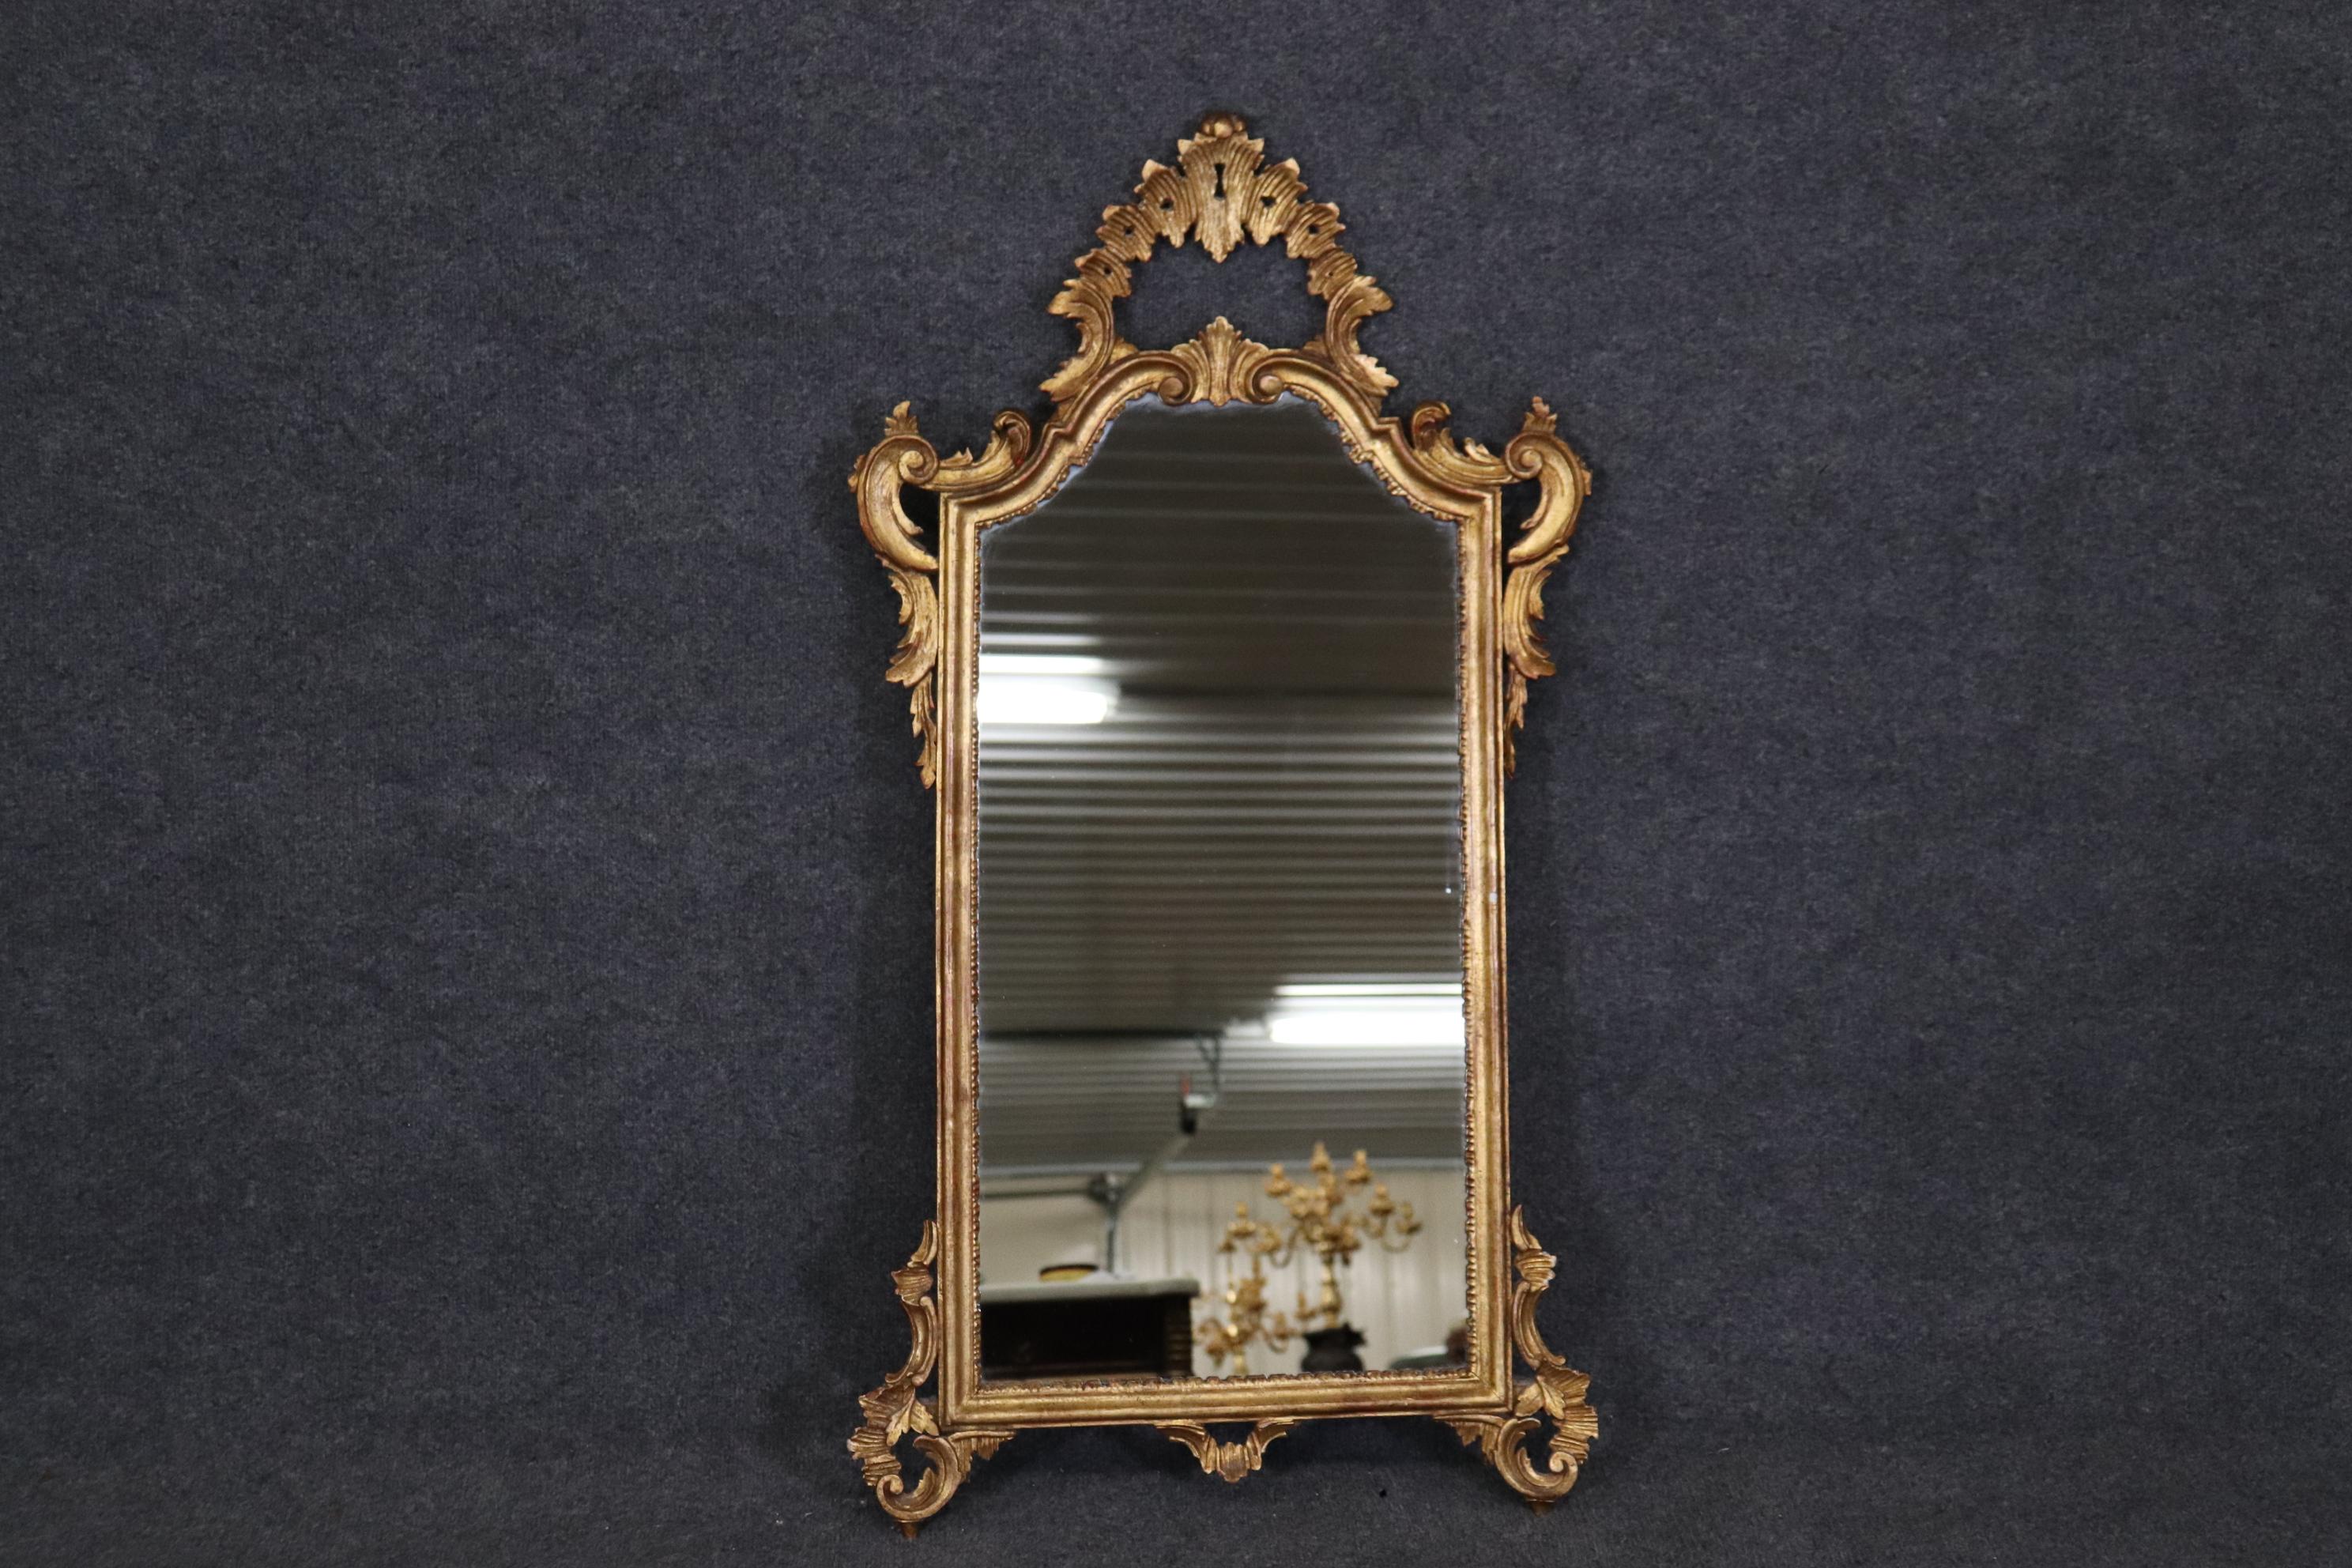 Dimensions- H: 42 1/2 in W: 22 3/4 in D: 3 3/4 in

This Italian Rococo style gold gilt carved accent wall hanging mirror is truly a luxurious piece that will bring a sense of luxury and character into your home or place of choosing!  If you look at